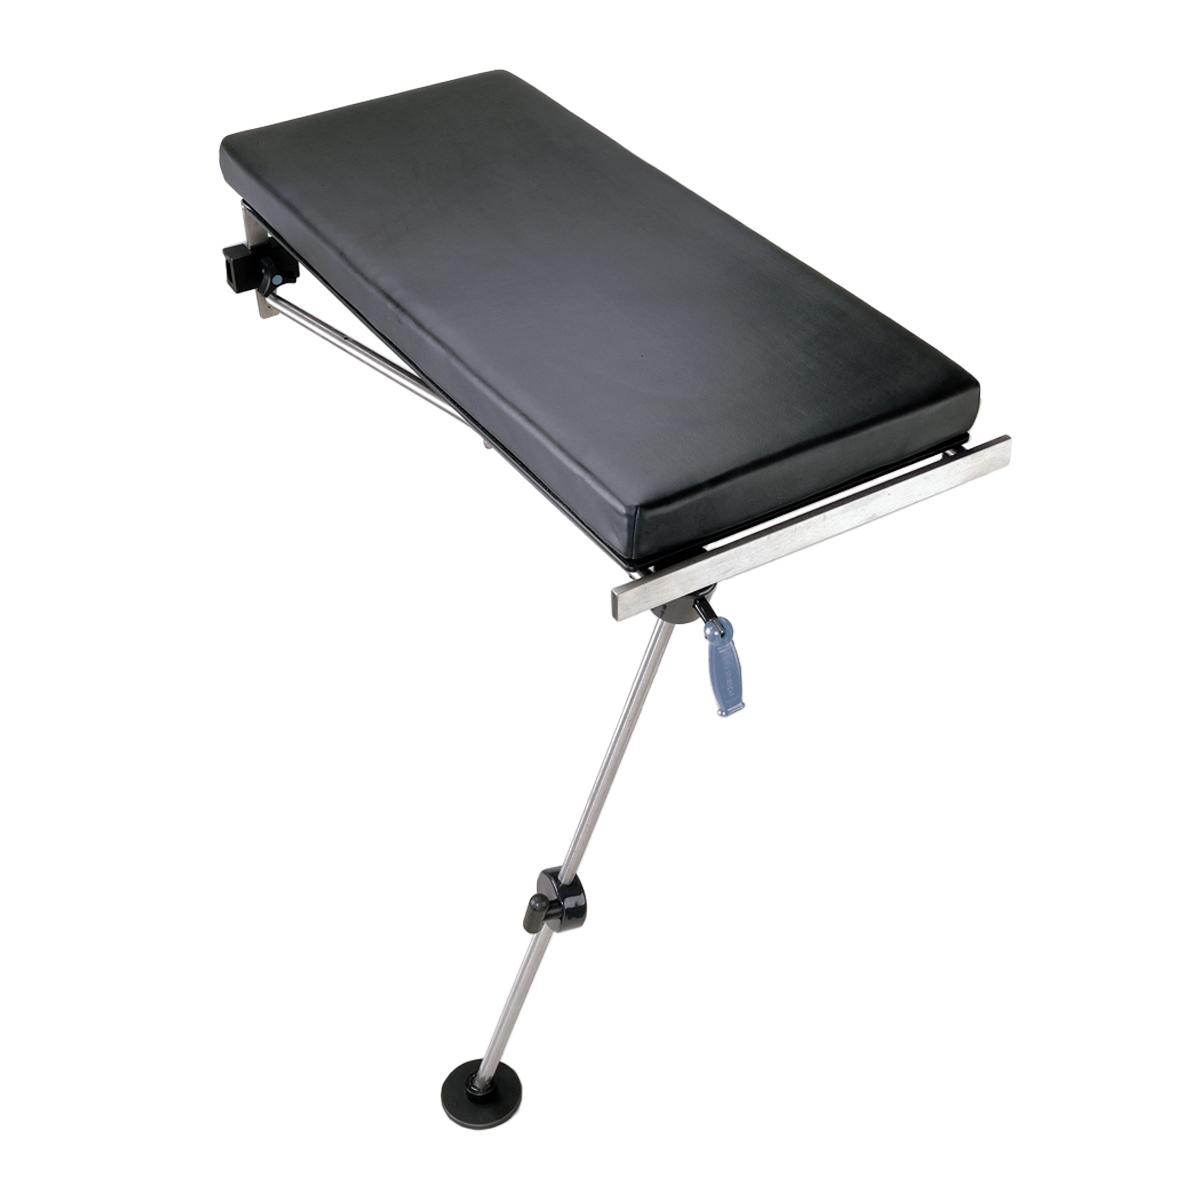 Basic Rectangular Table, #O-AHTR, attached to OR table